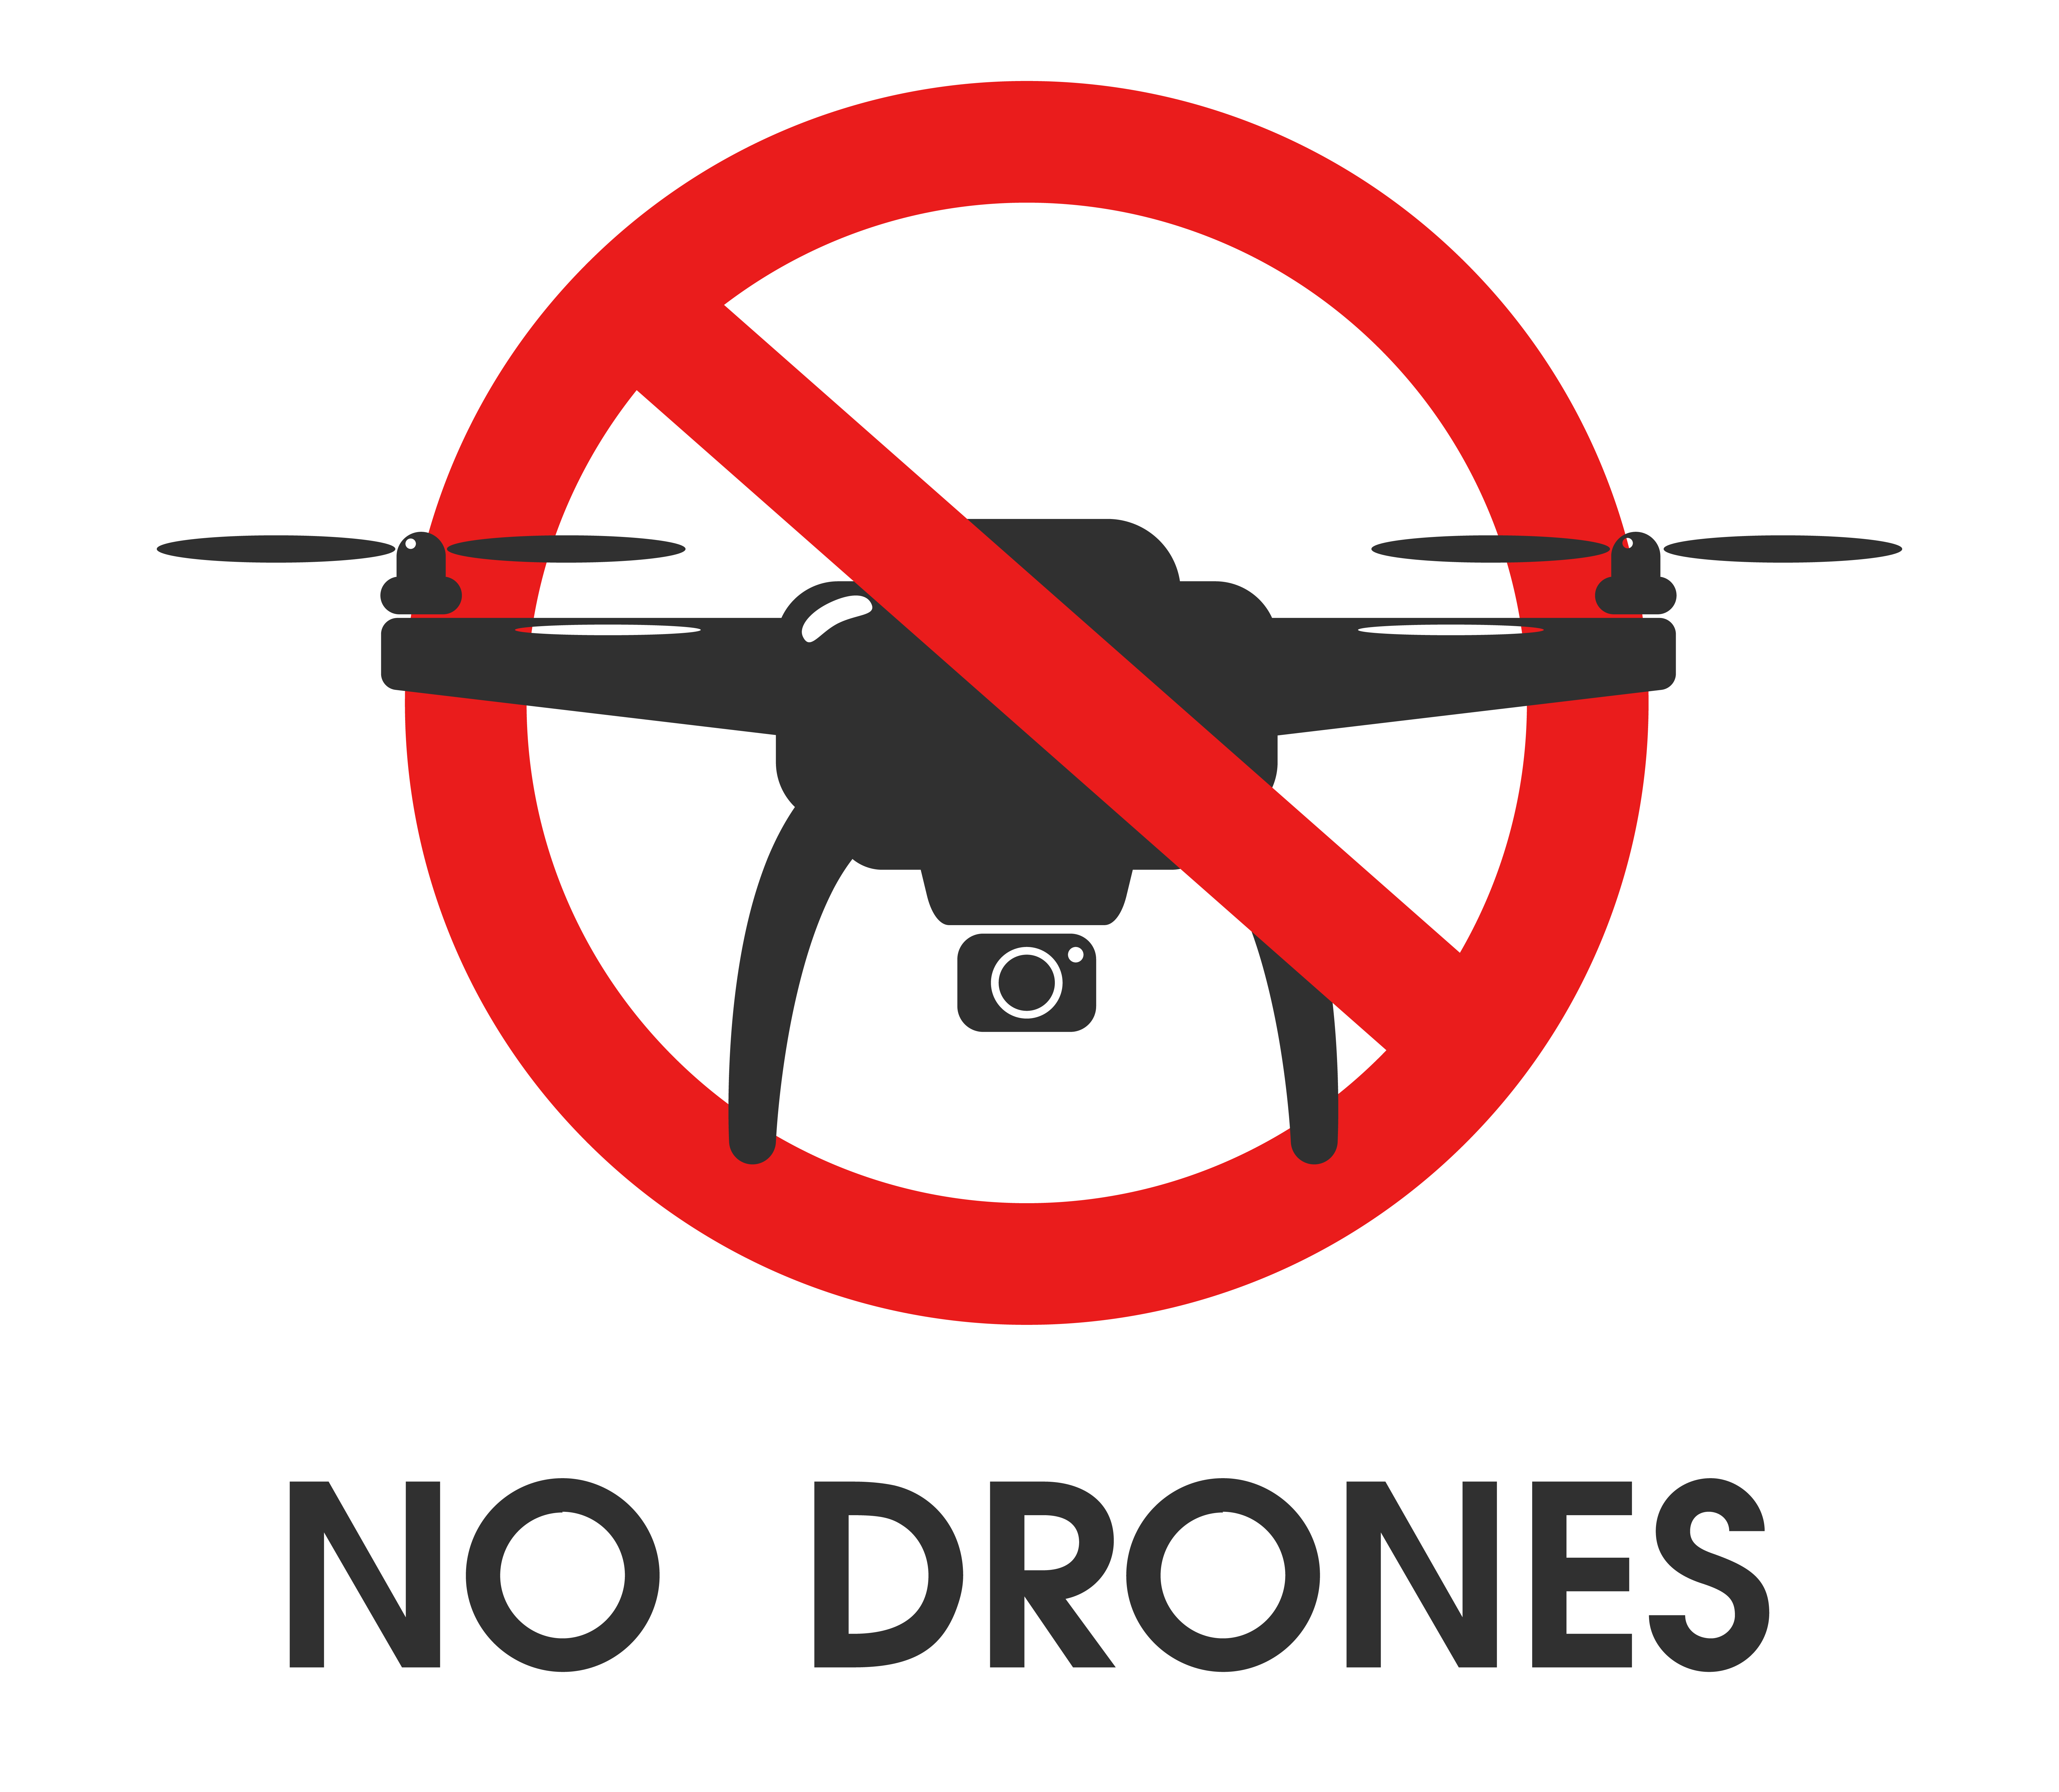 No drones allowed prohibition Safety sign 